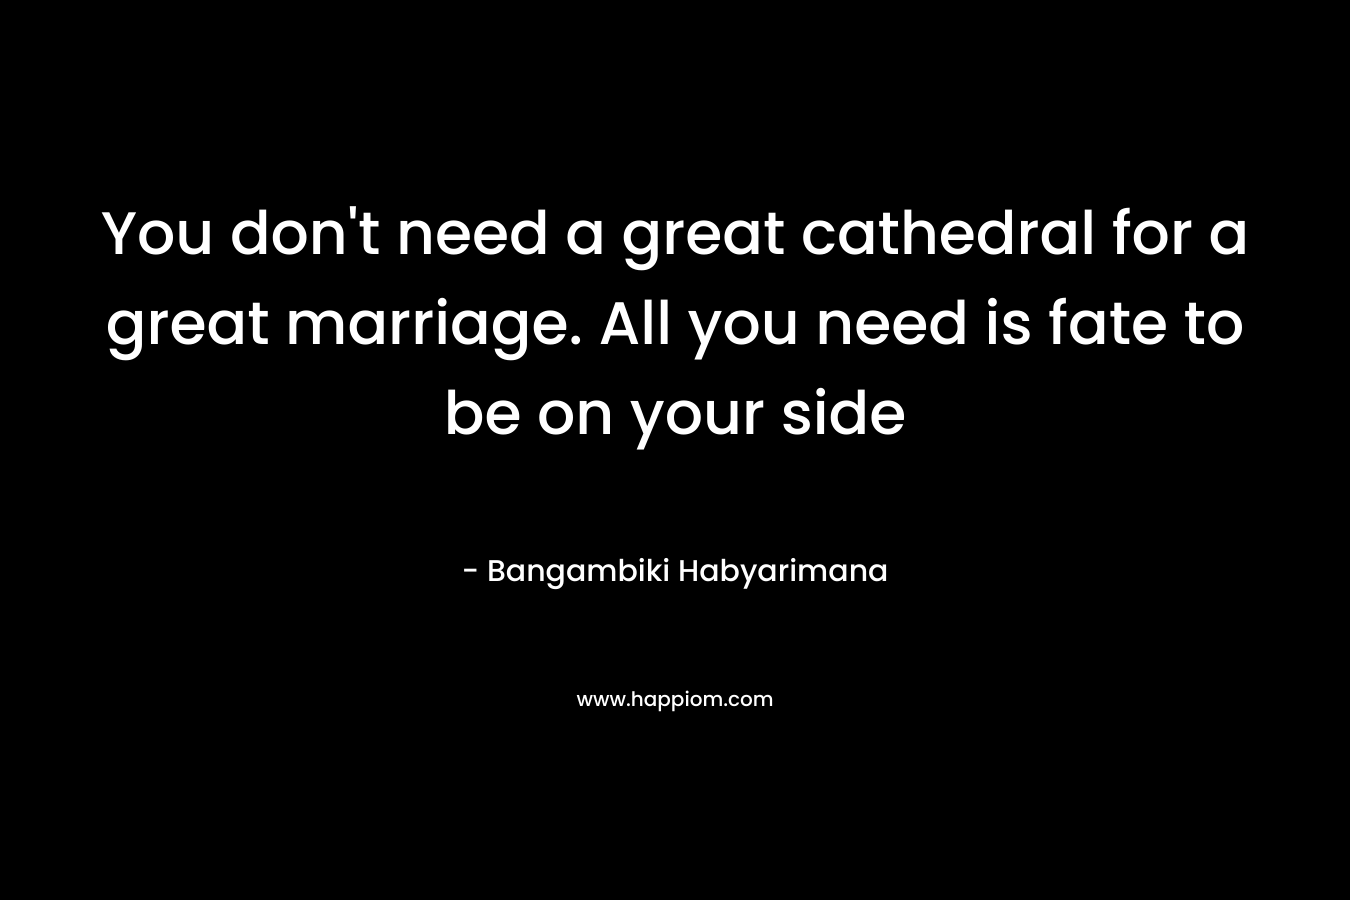 You don't need a great cathedral for a great marriage. All you need is fate to be on your side